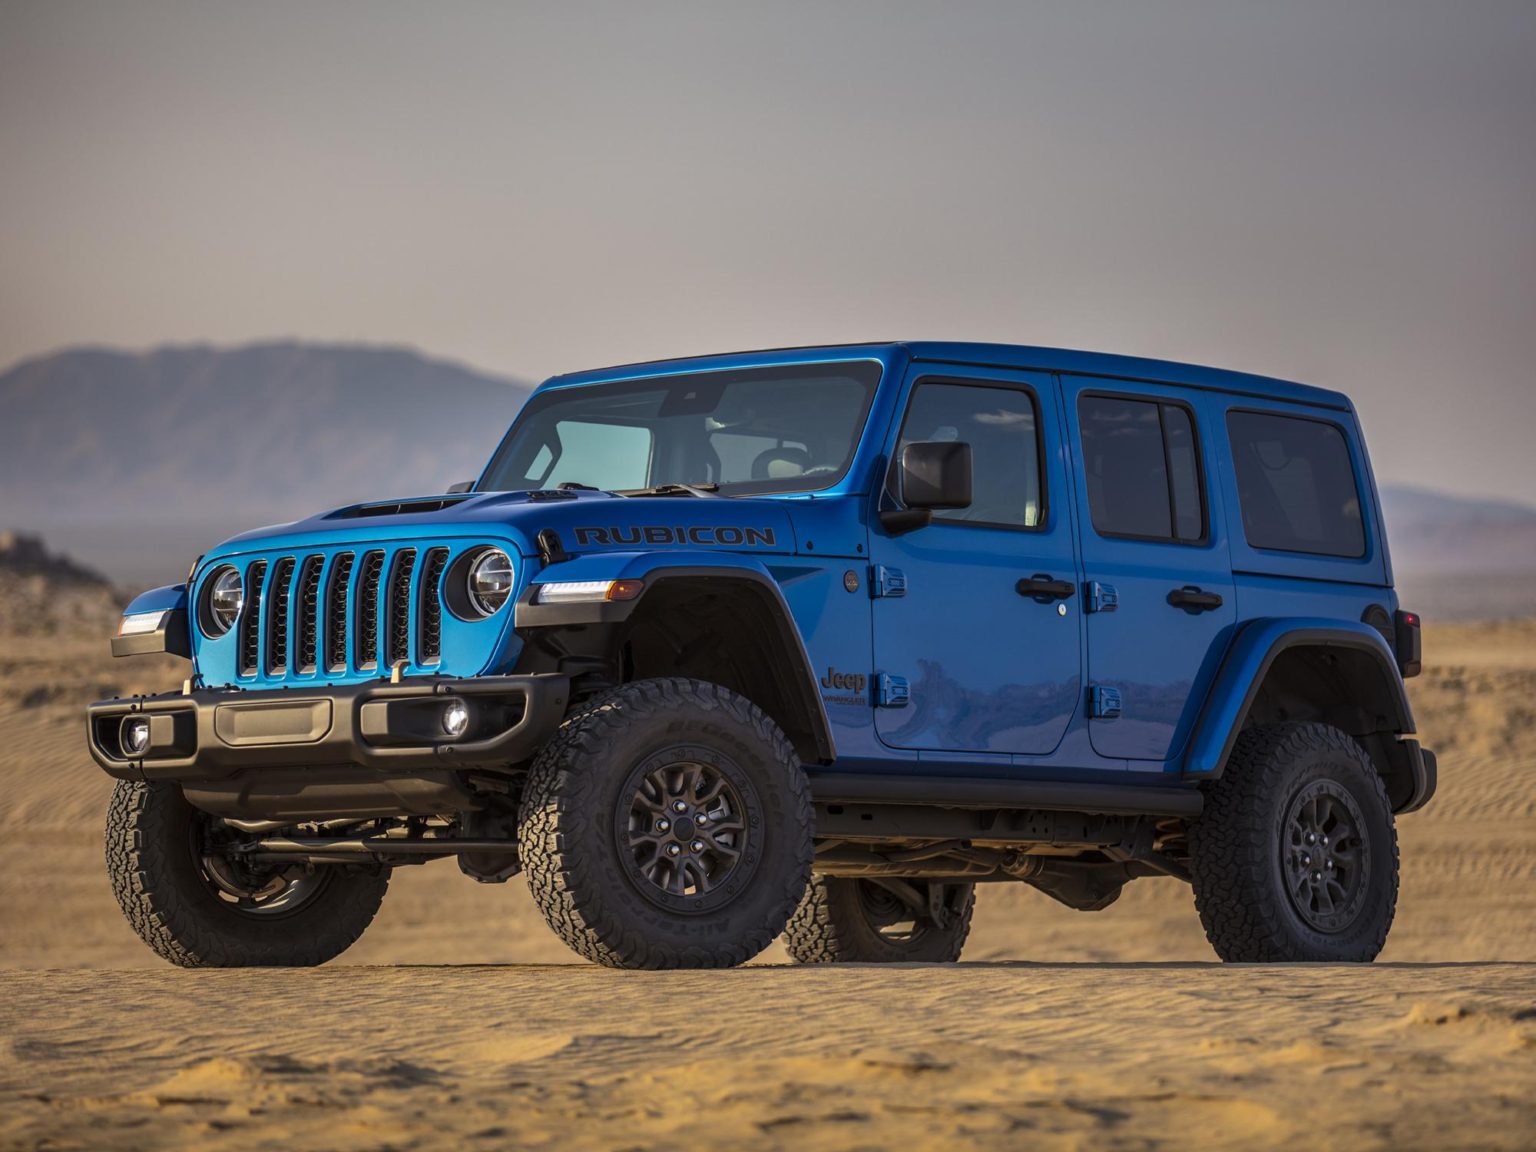 The 2021 Jeep Wrangler Rubicon 392 comes to a dealership near you later this quarter.